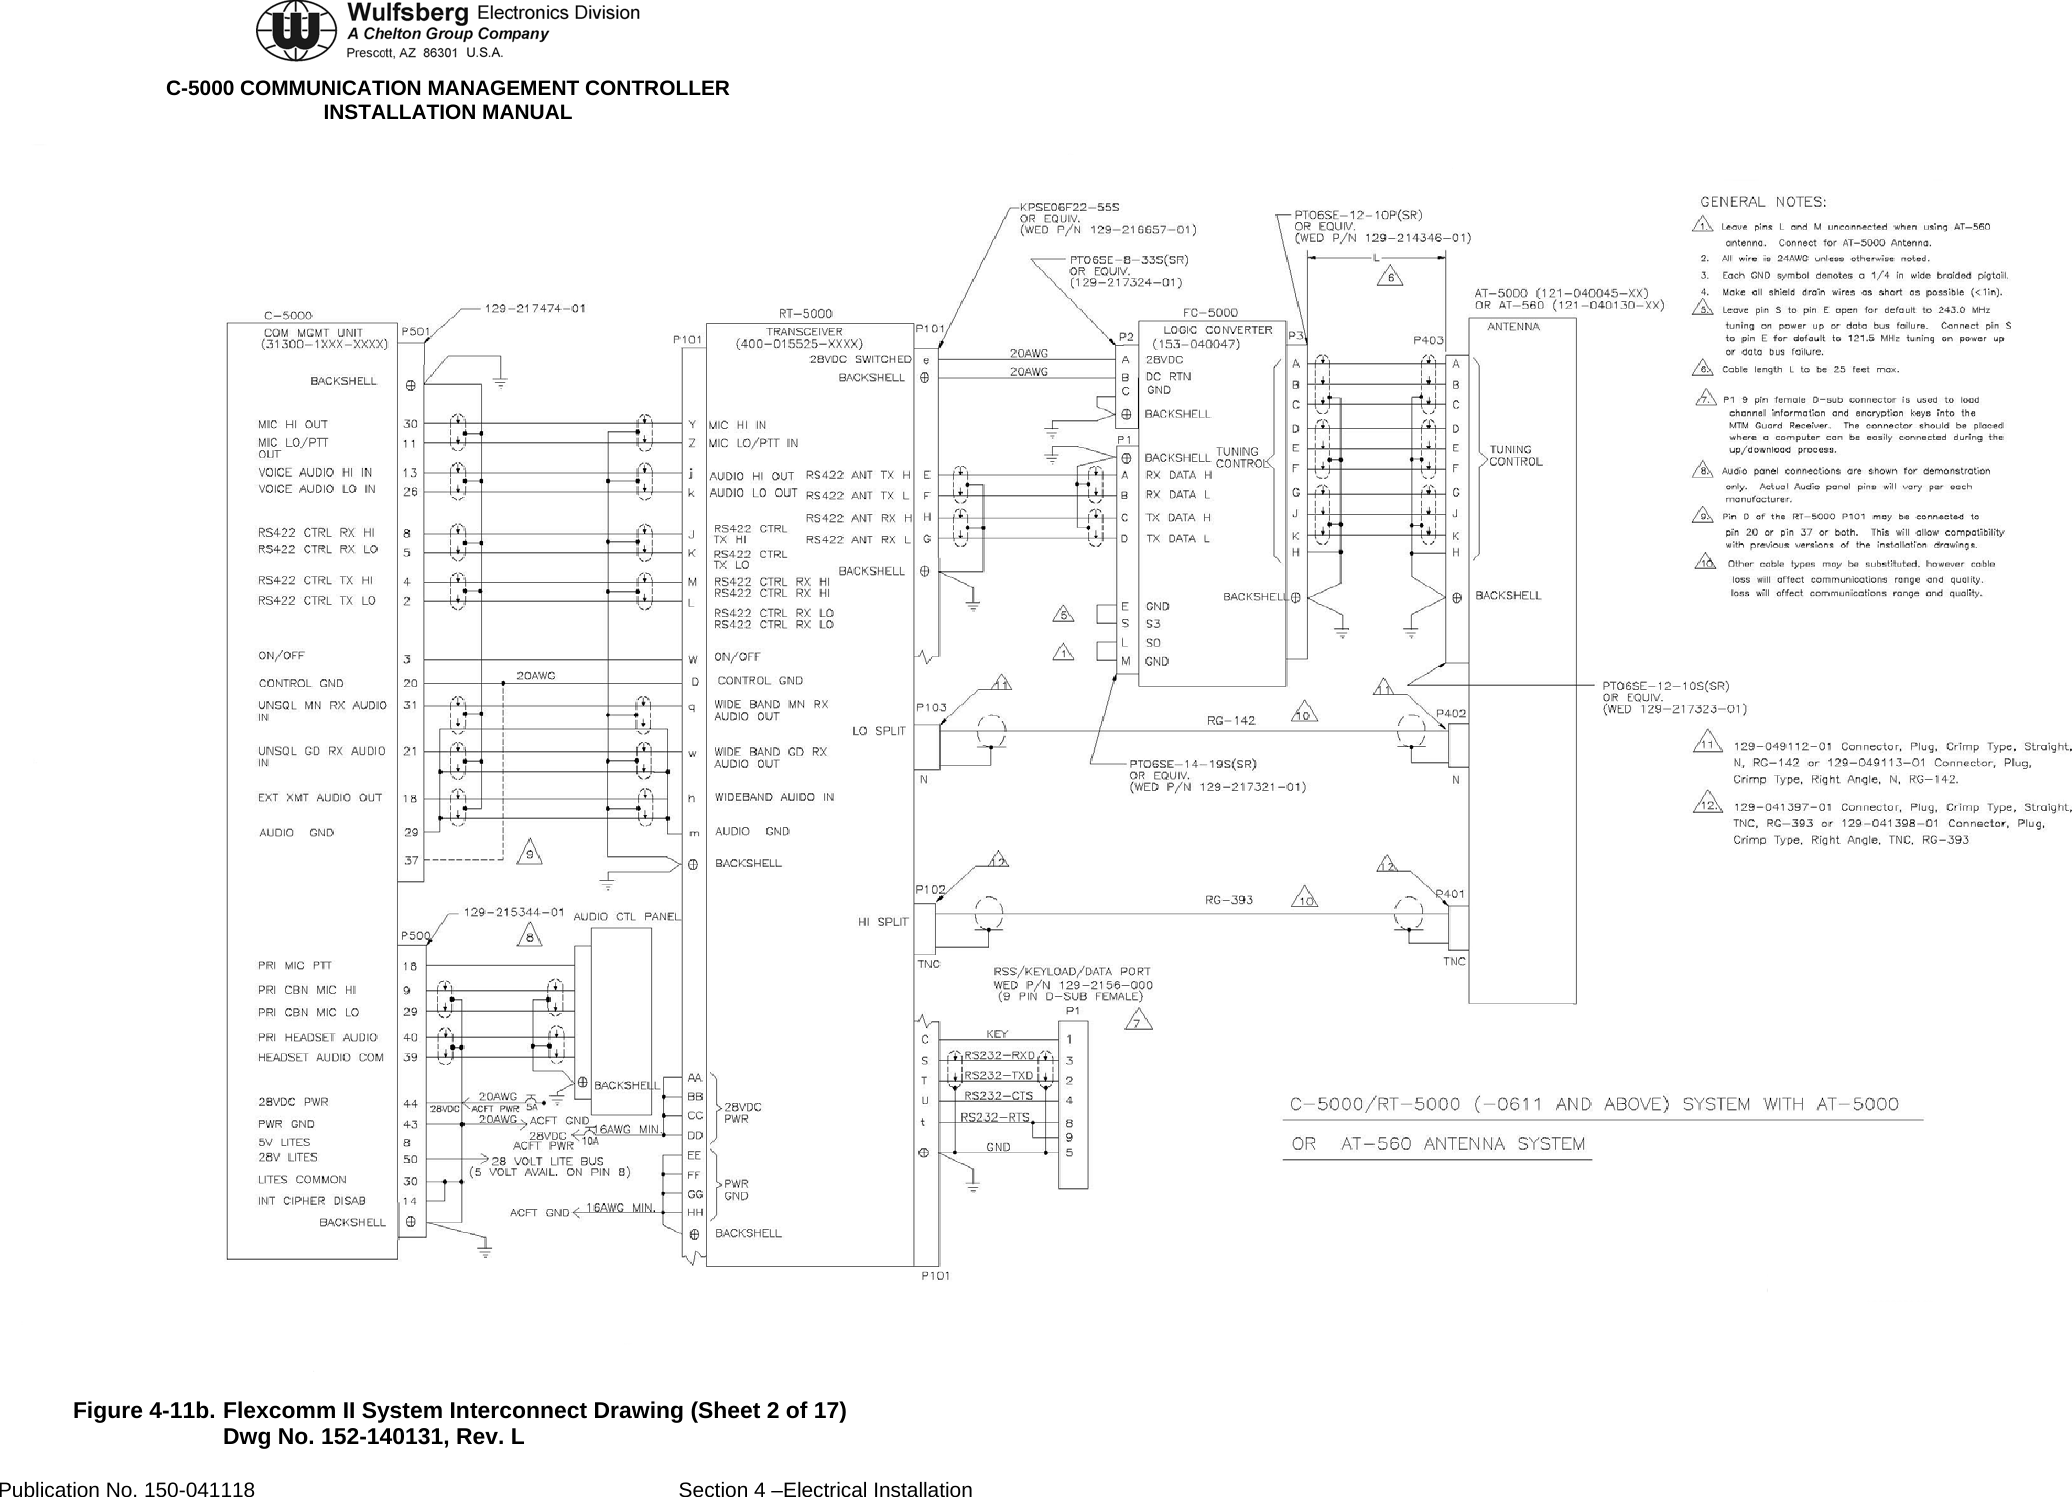  C-5000 COMMUNICATION MANAGEMENT CONTROLLER INSTALLATION MANUAL  Figure 4-11b. Flexcomm II System Interconnect Drawing (Sheet 2 of 17) Dwg No. 152-140131, Rev. L Publication No. 150-041118  Section 4 –Electrical Installation 